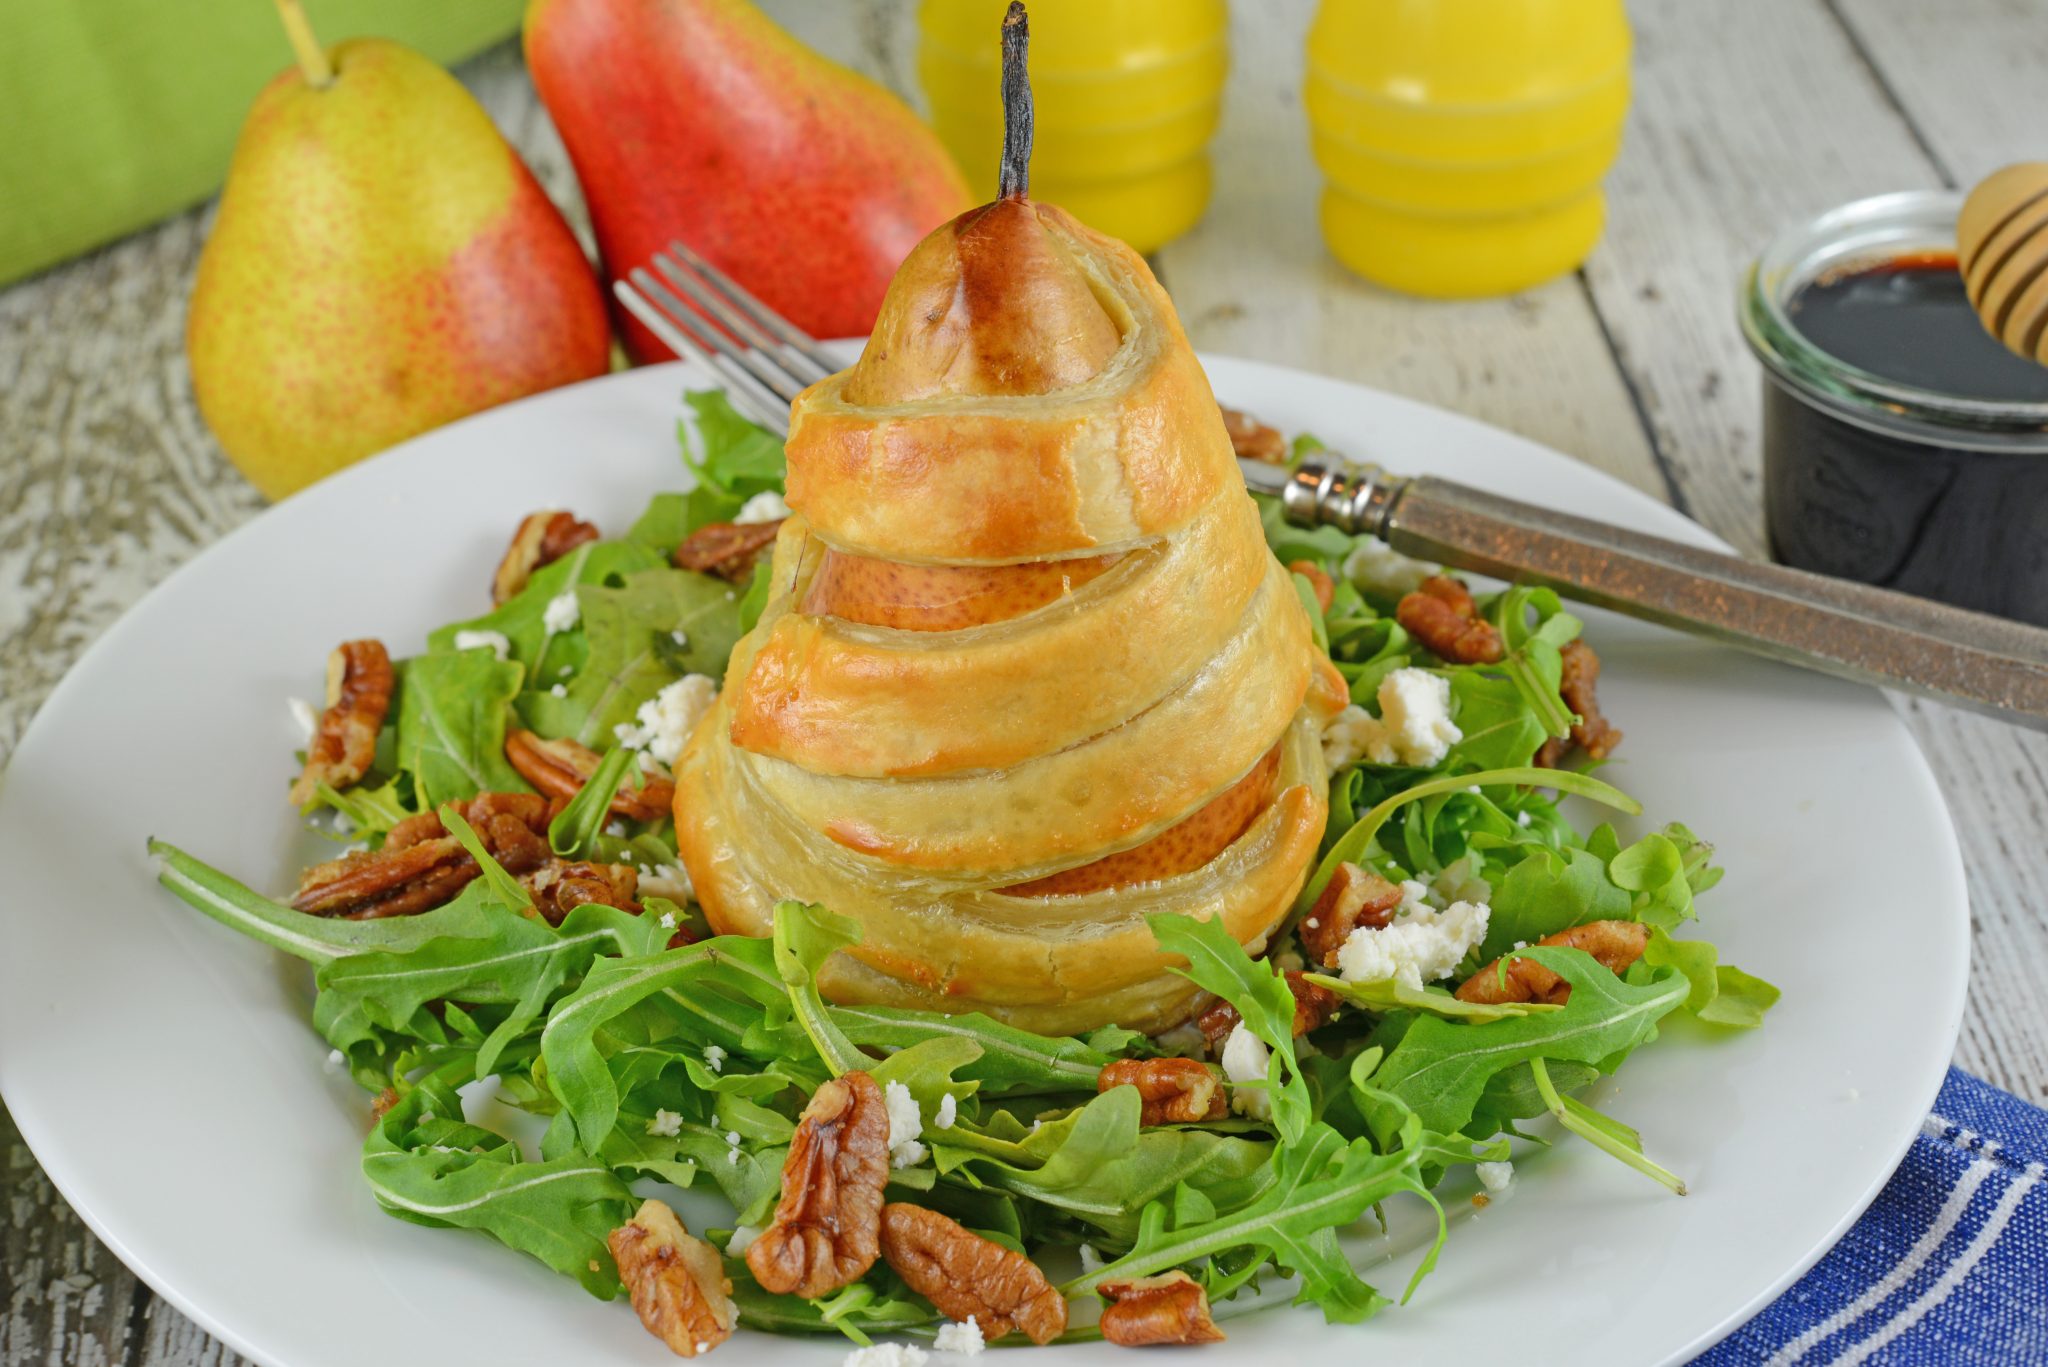 Pear Salad with Candied Walnuts - An Easy Puff Pastry Appetizer